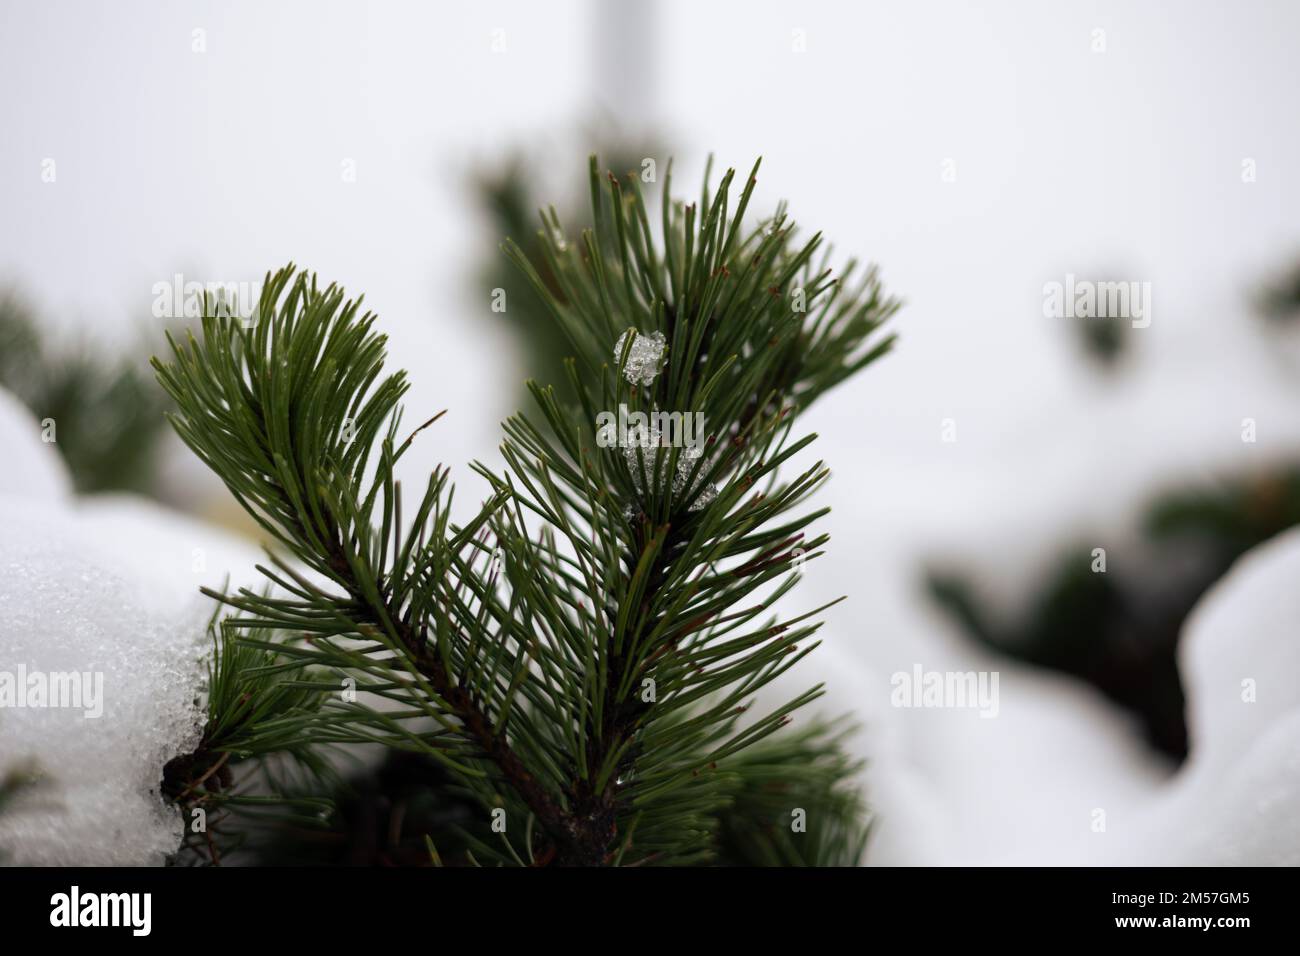 A closeup shot of green dwarf mountain pine needles during winter season in daylight with blur background Stock Photo